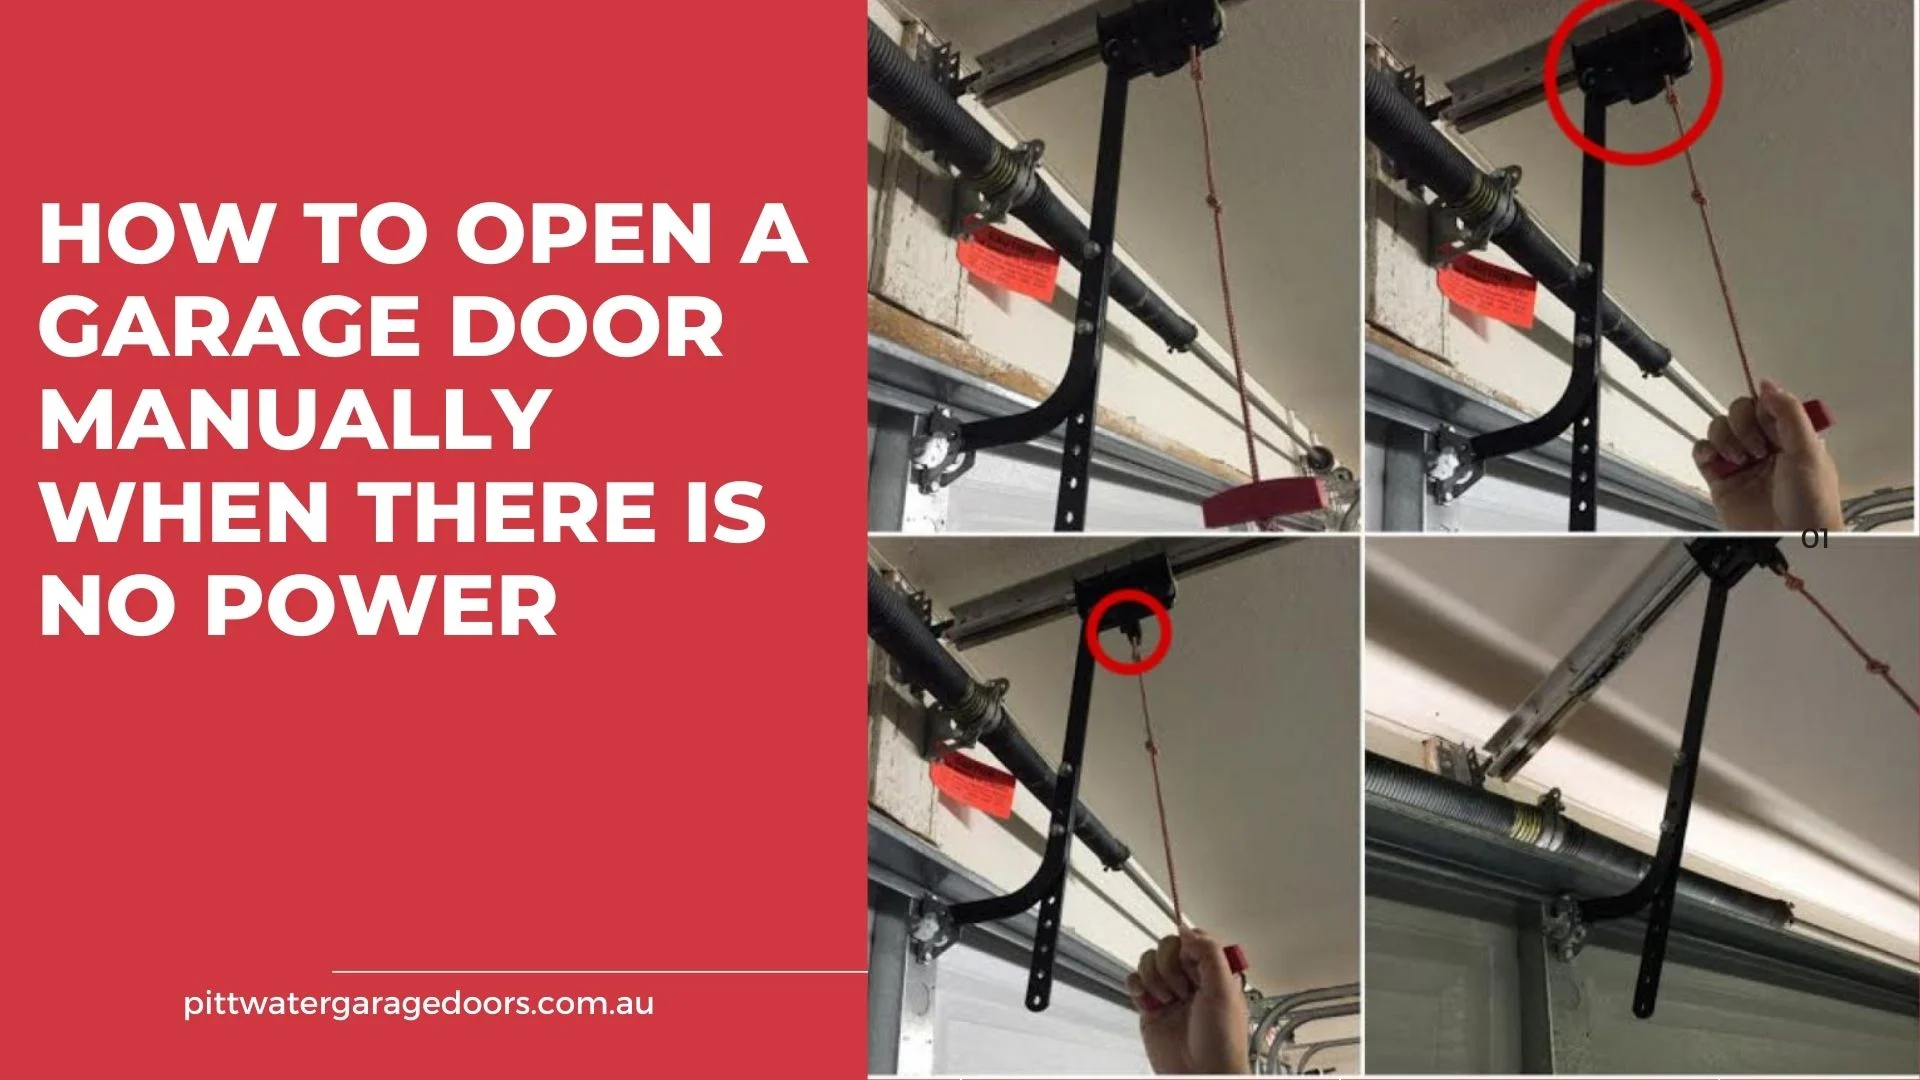 How-To-Open-Garage-Door-Manually-When-There-is-no-Power